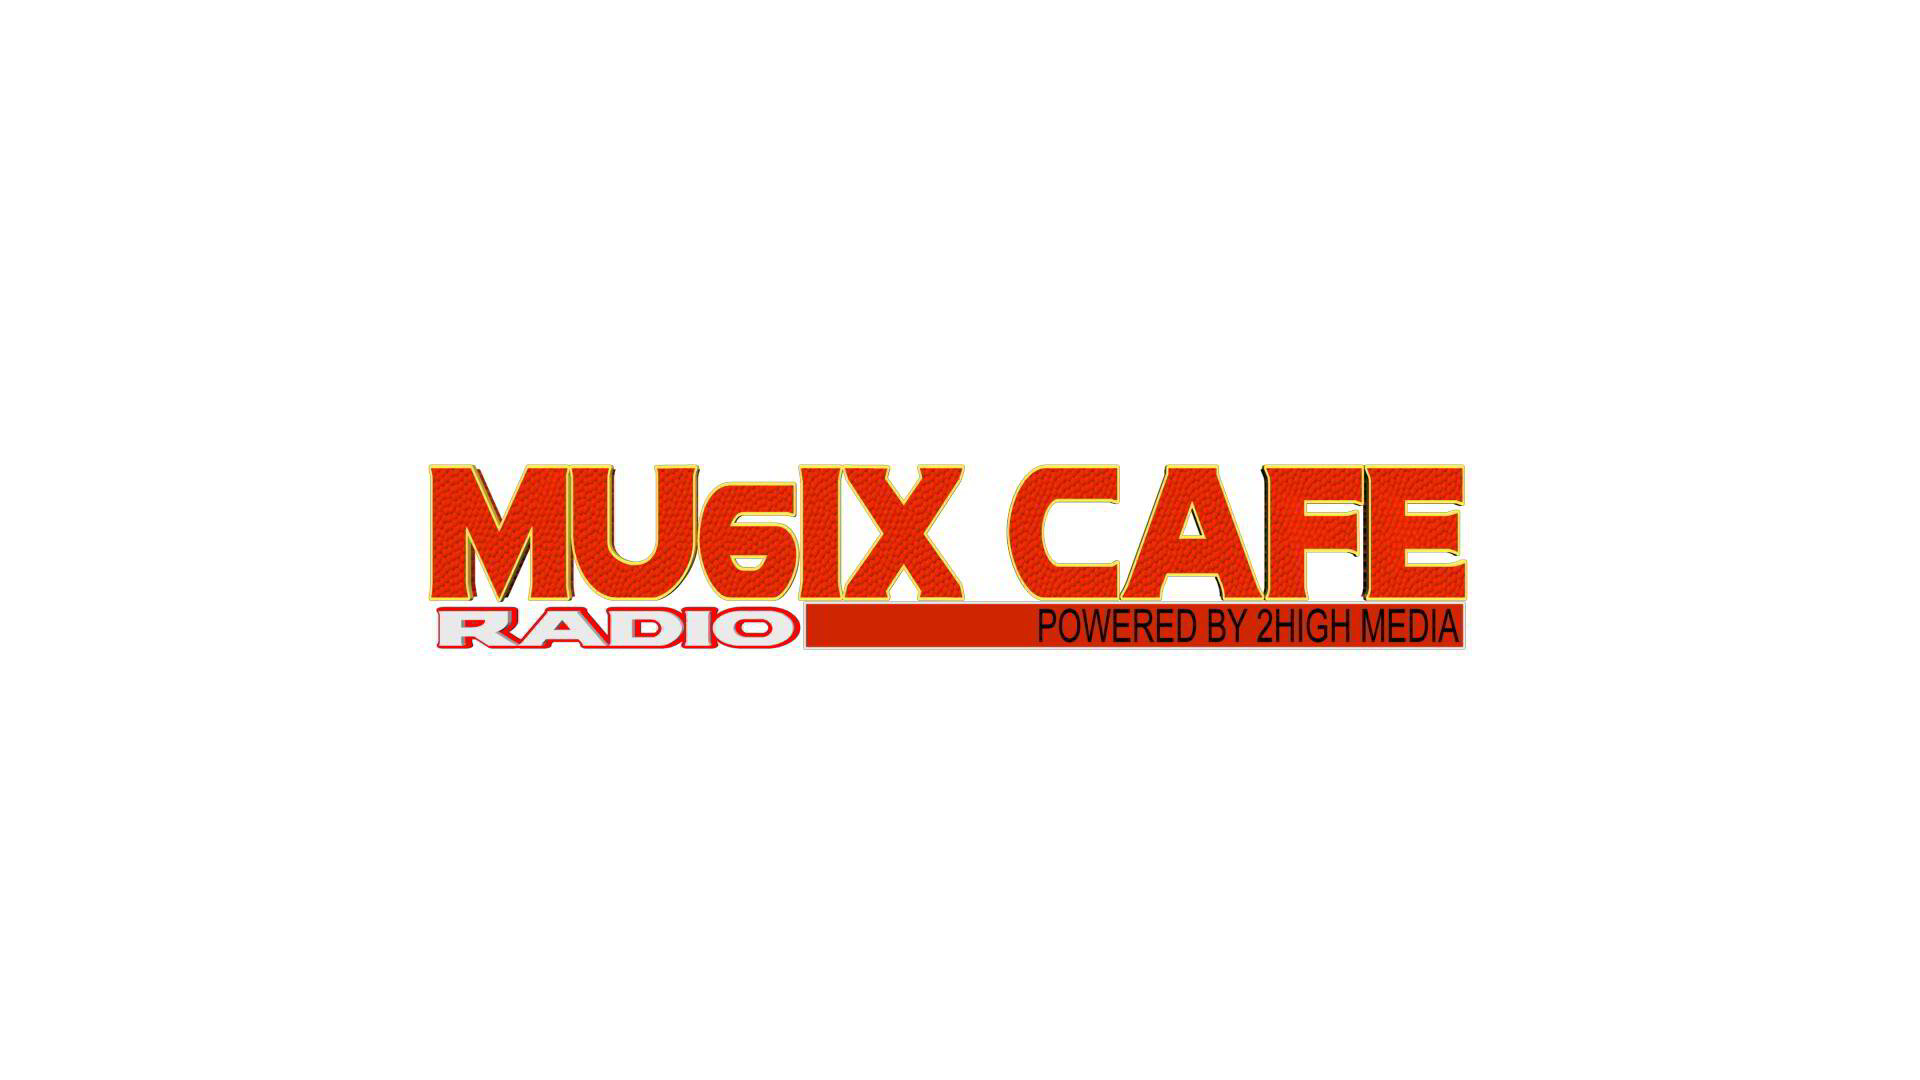 At 8pm For 1 Hour This Week On Mu6ix Cafe Radio With DJ R Dub L